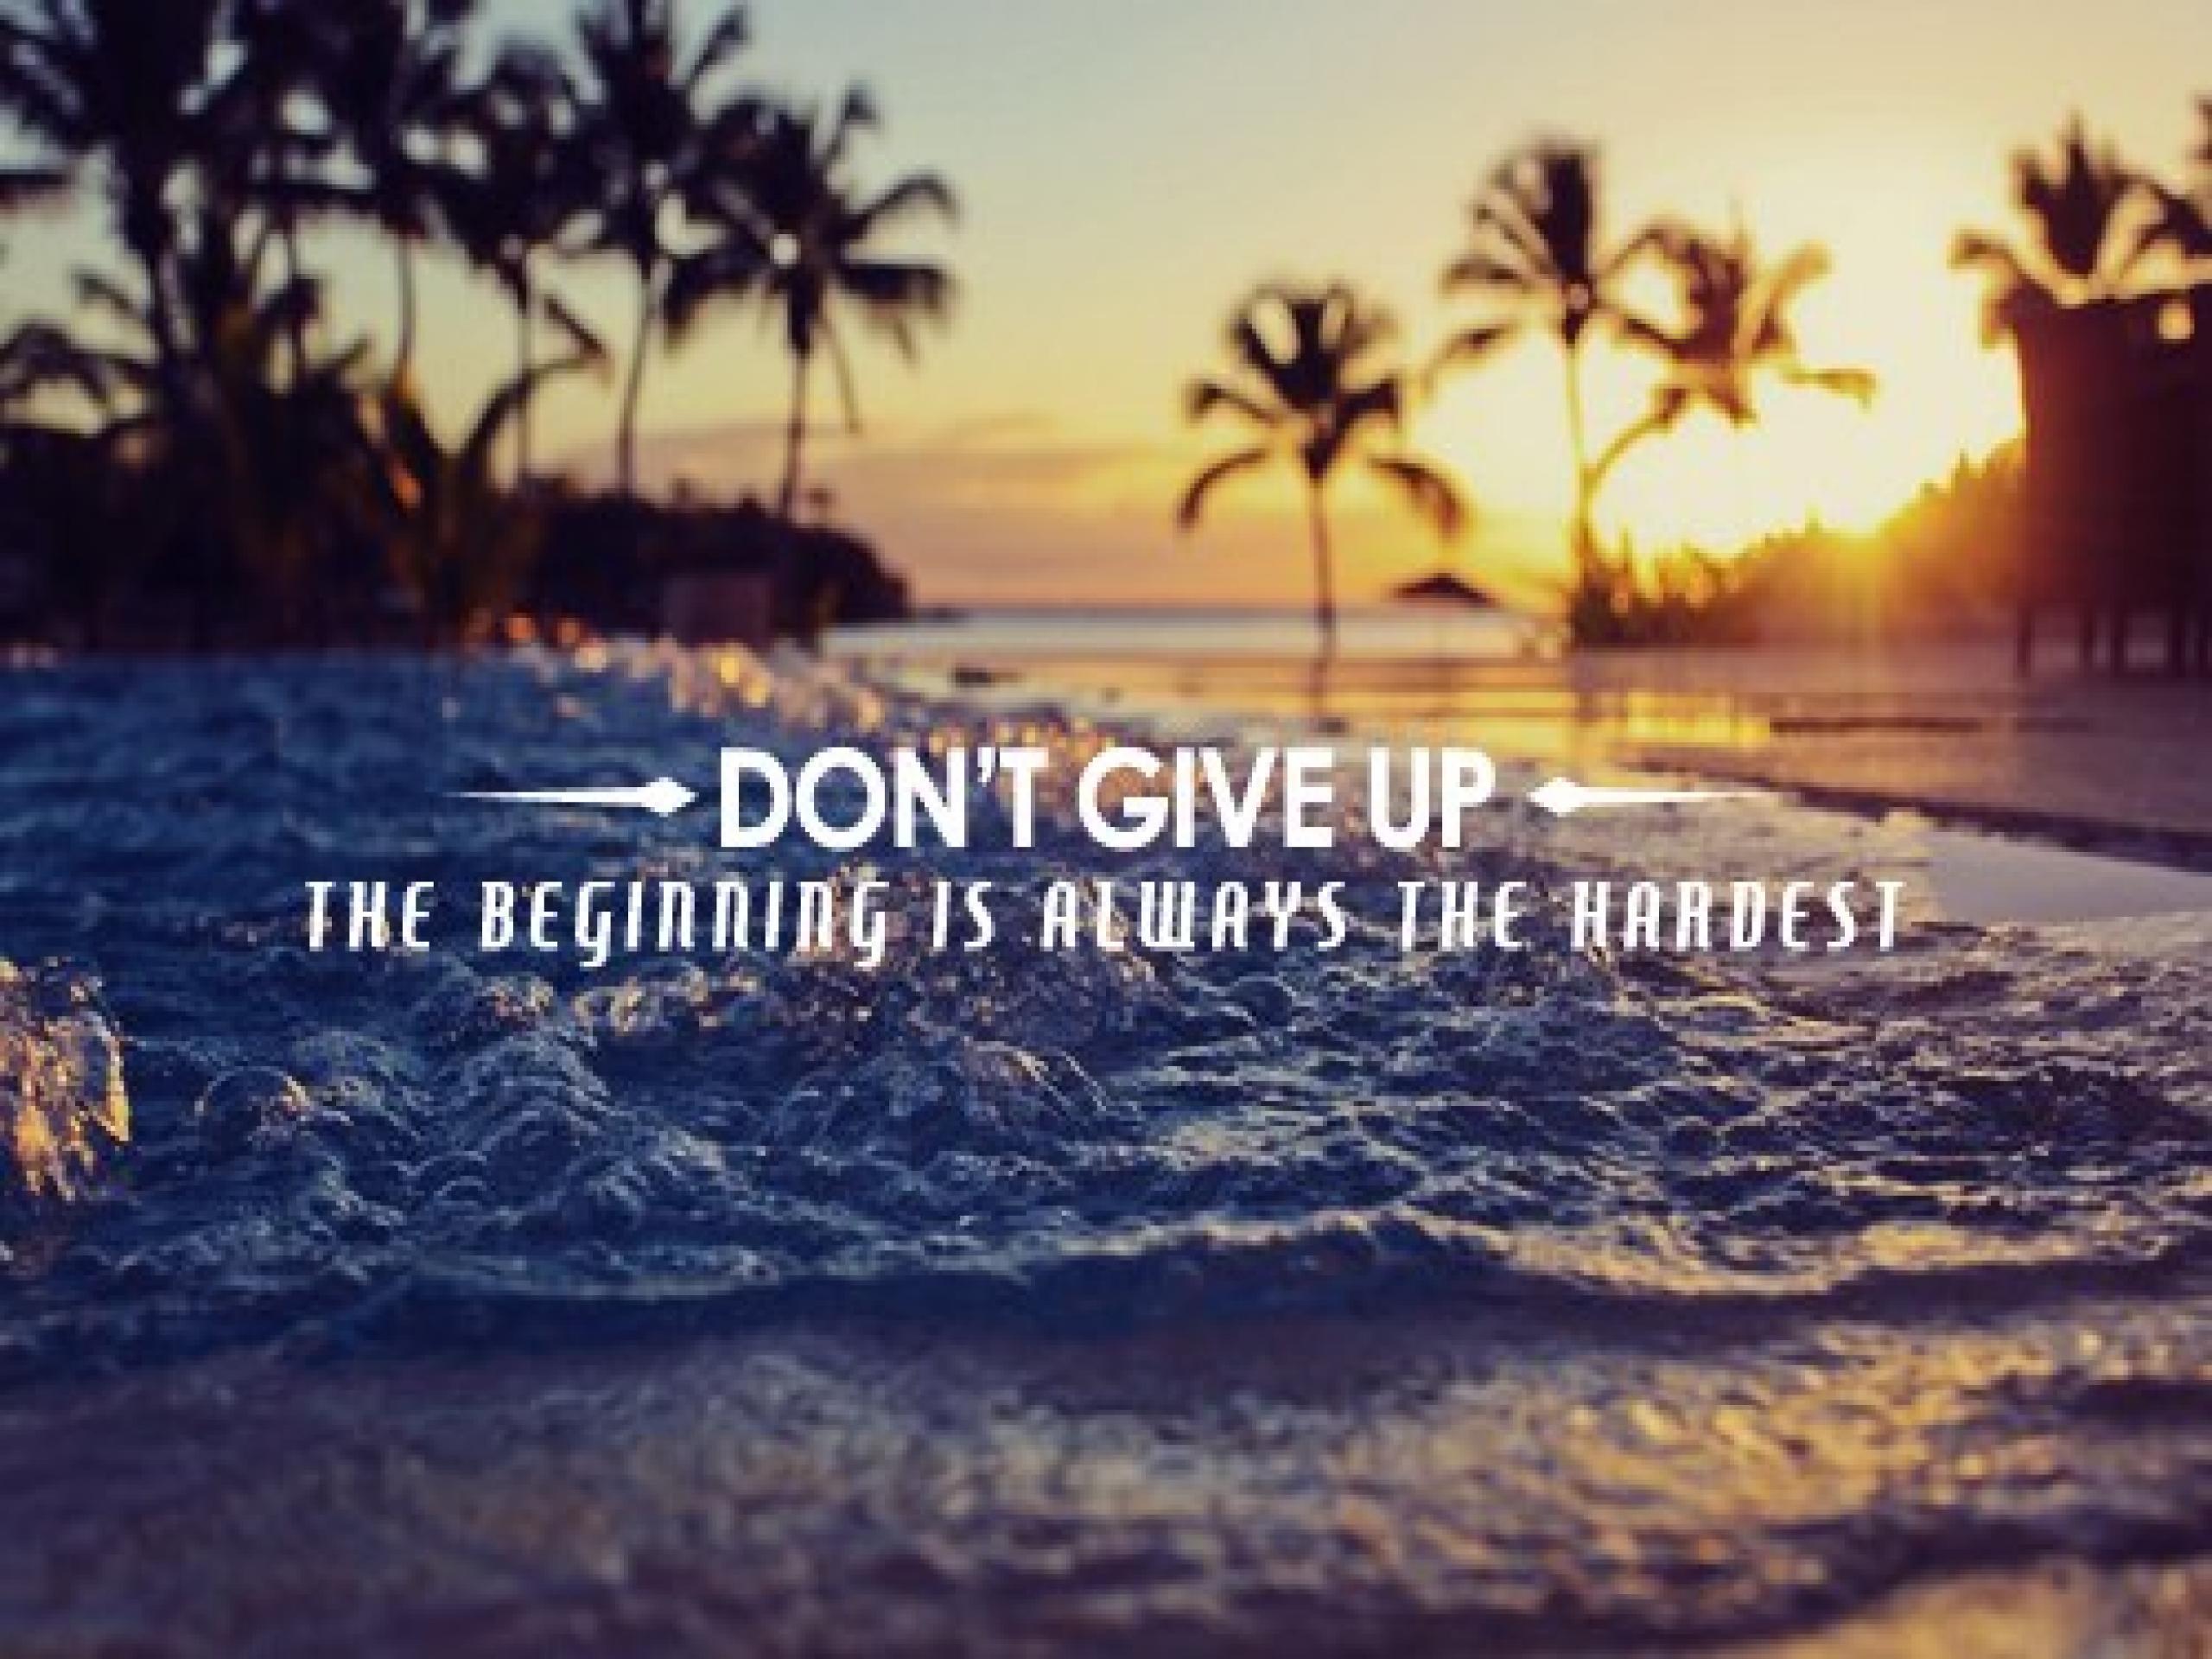 wi.525: Don't Give Up Wallpaper (500x333)